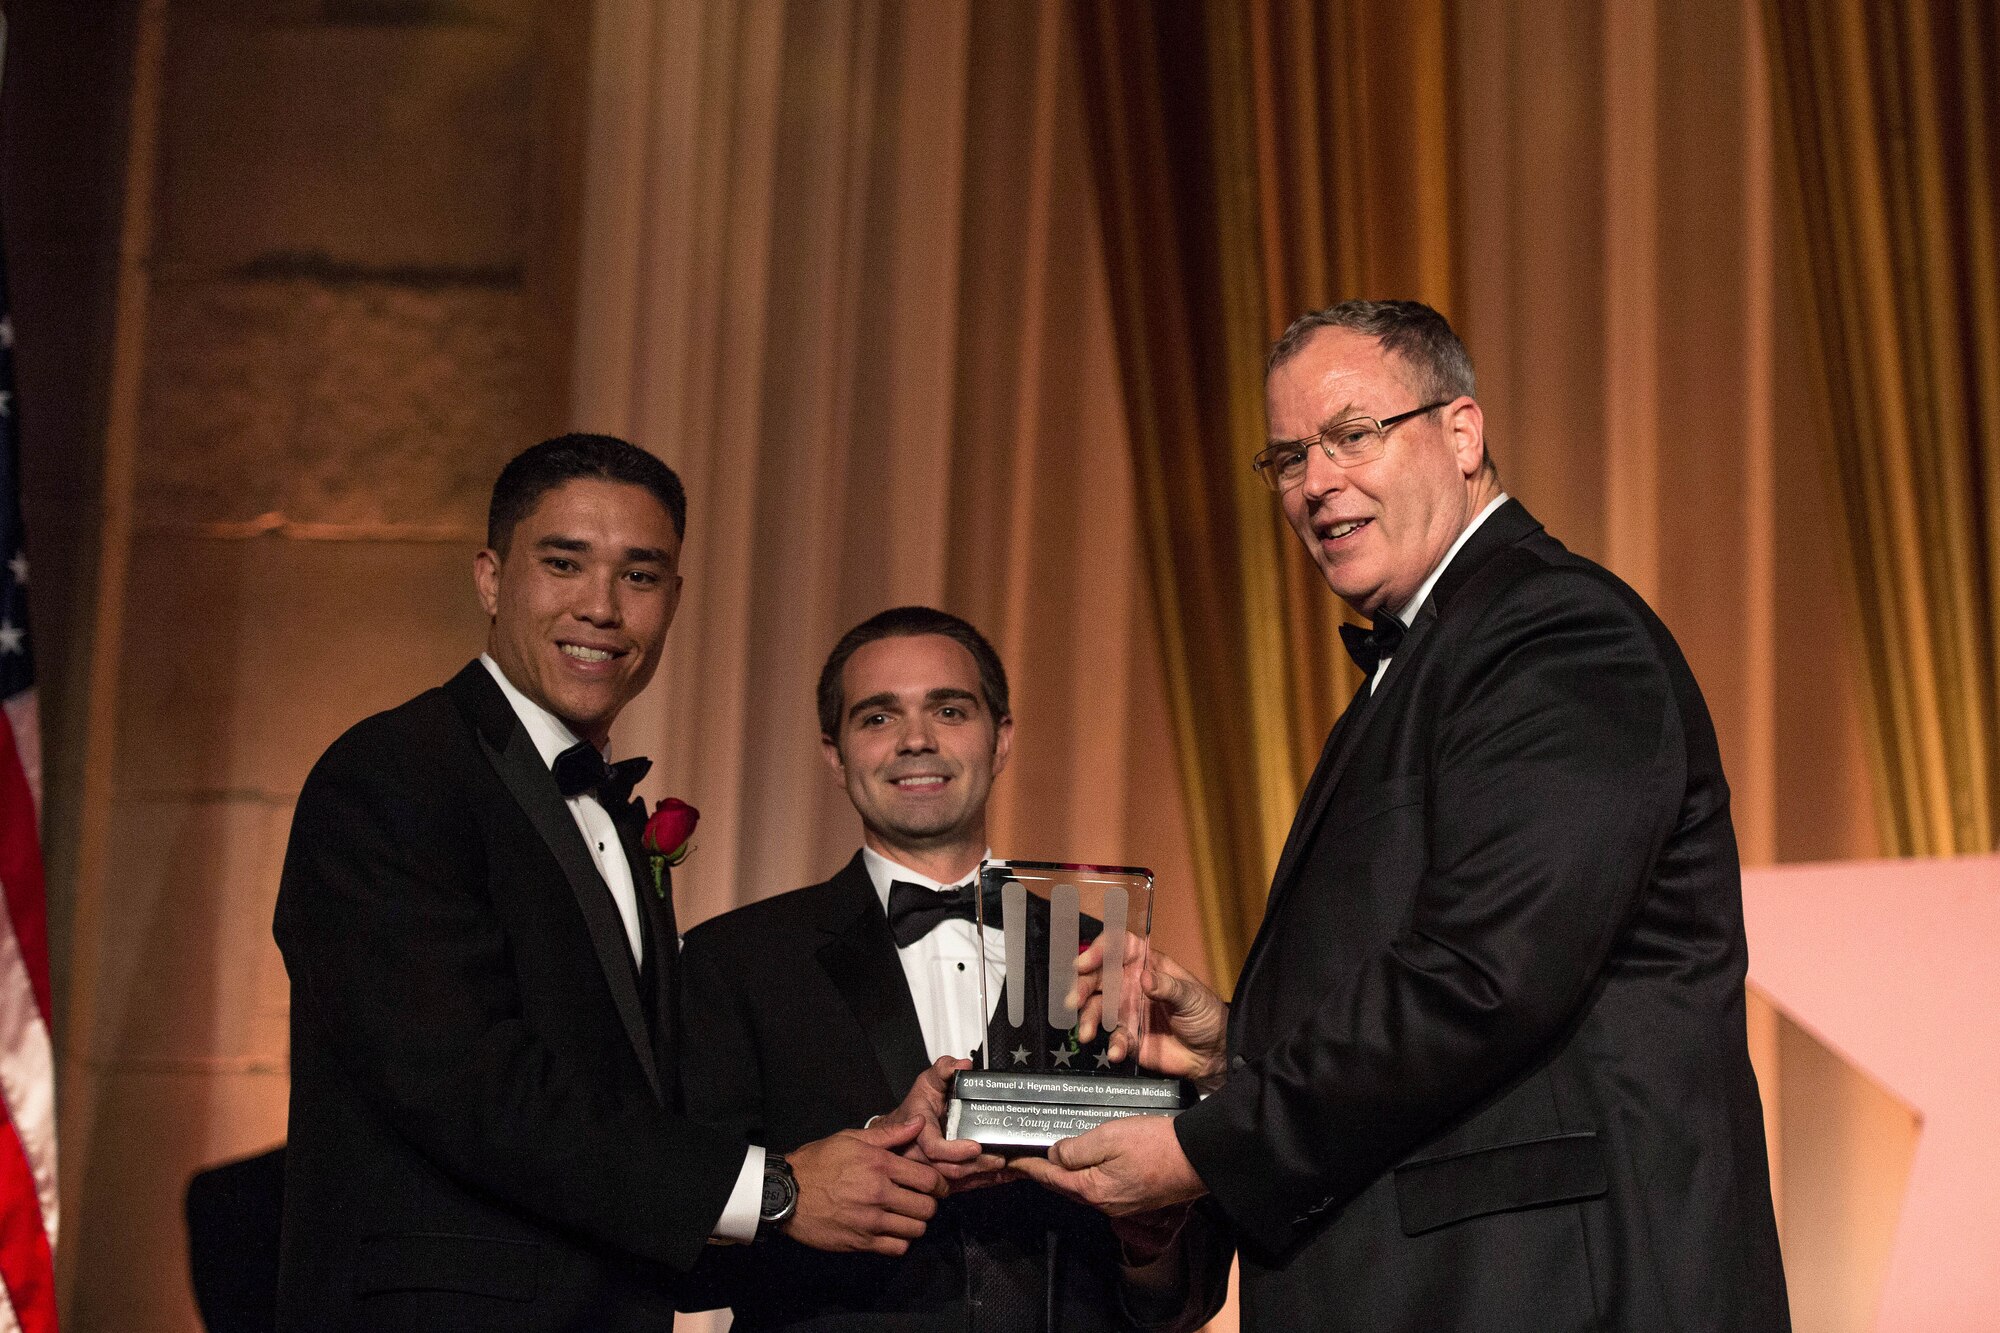 Deputy Defense Secretary Bob Work, right, presents the 2014 Samuel J. Heyman Service to America Medals to Ben Tran, left, and Sean Young, center, for their work in the field of national security and international affairs at the Sammie Awards national gala in Washington, D.C., Sept. 22, 2014.  (DoD photo by U.S. Navy Petty Officer 2nd Class Sean Hurt) 
